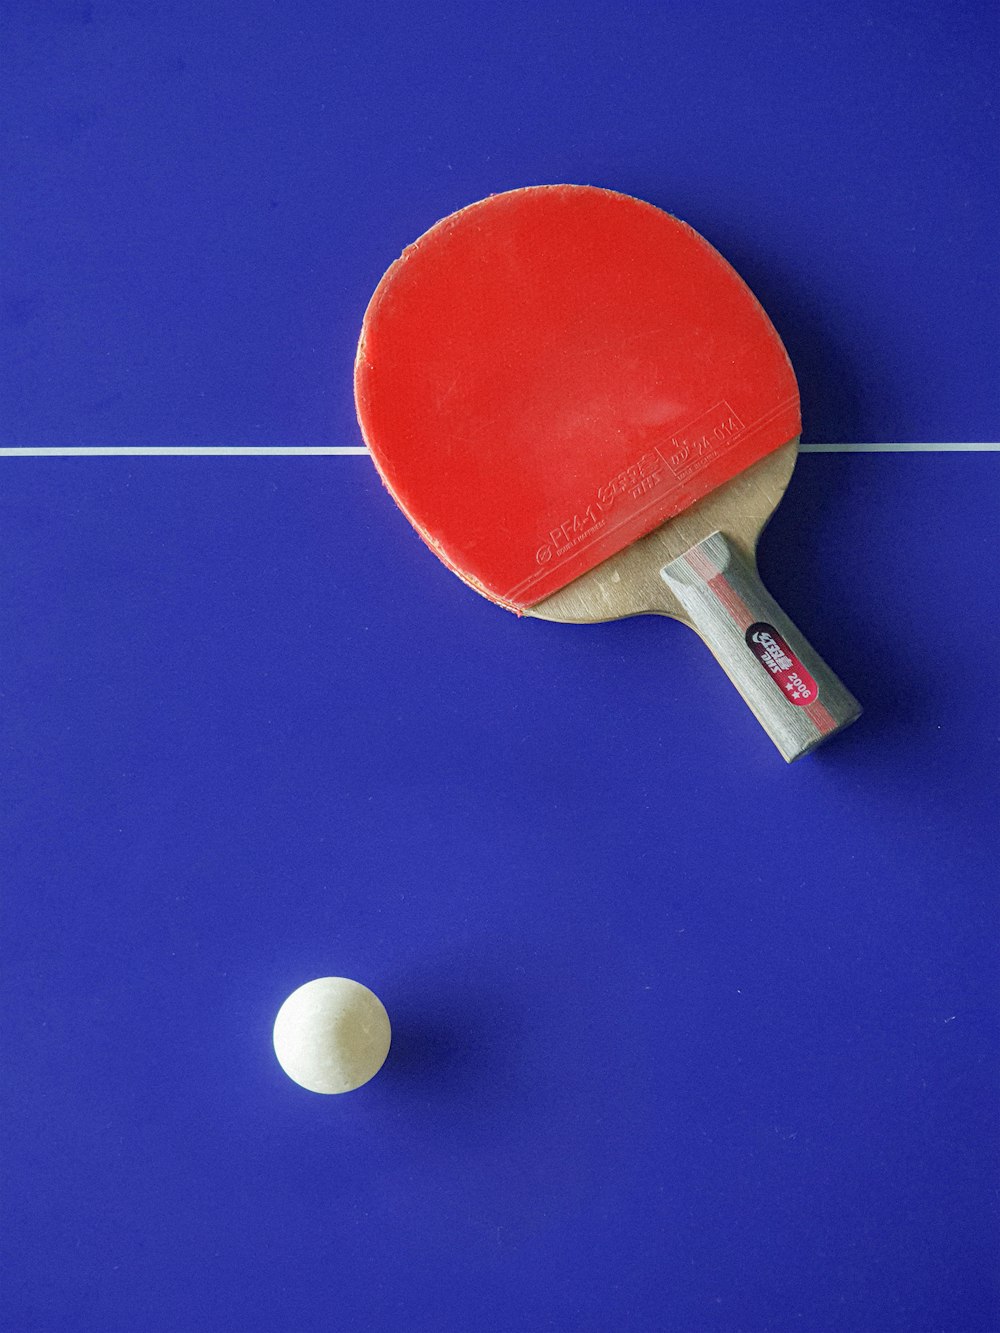 a ping pong paddle and ball on a blue table